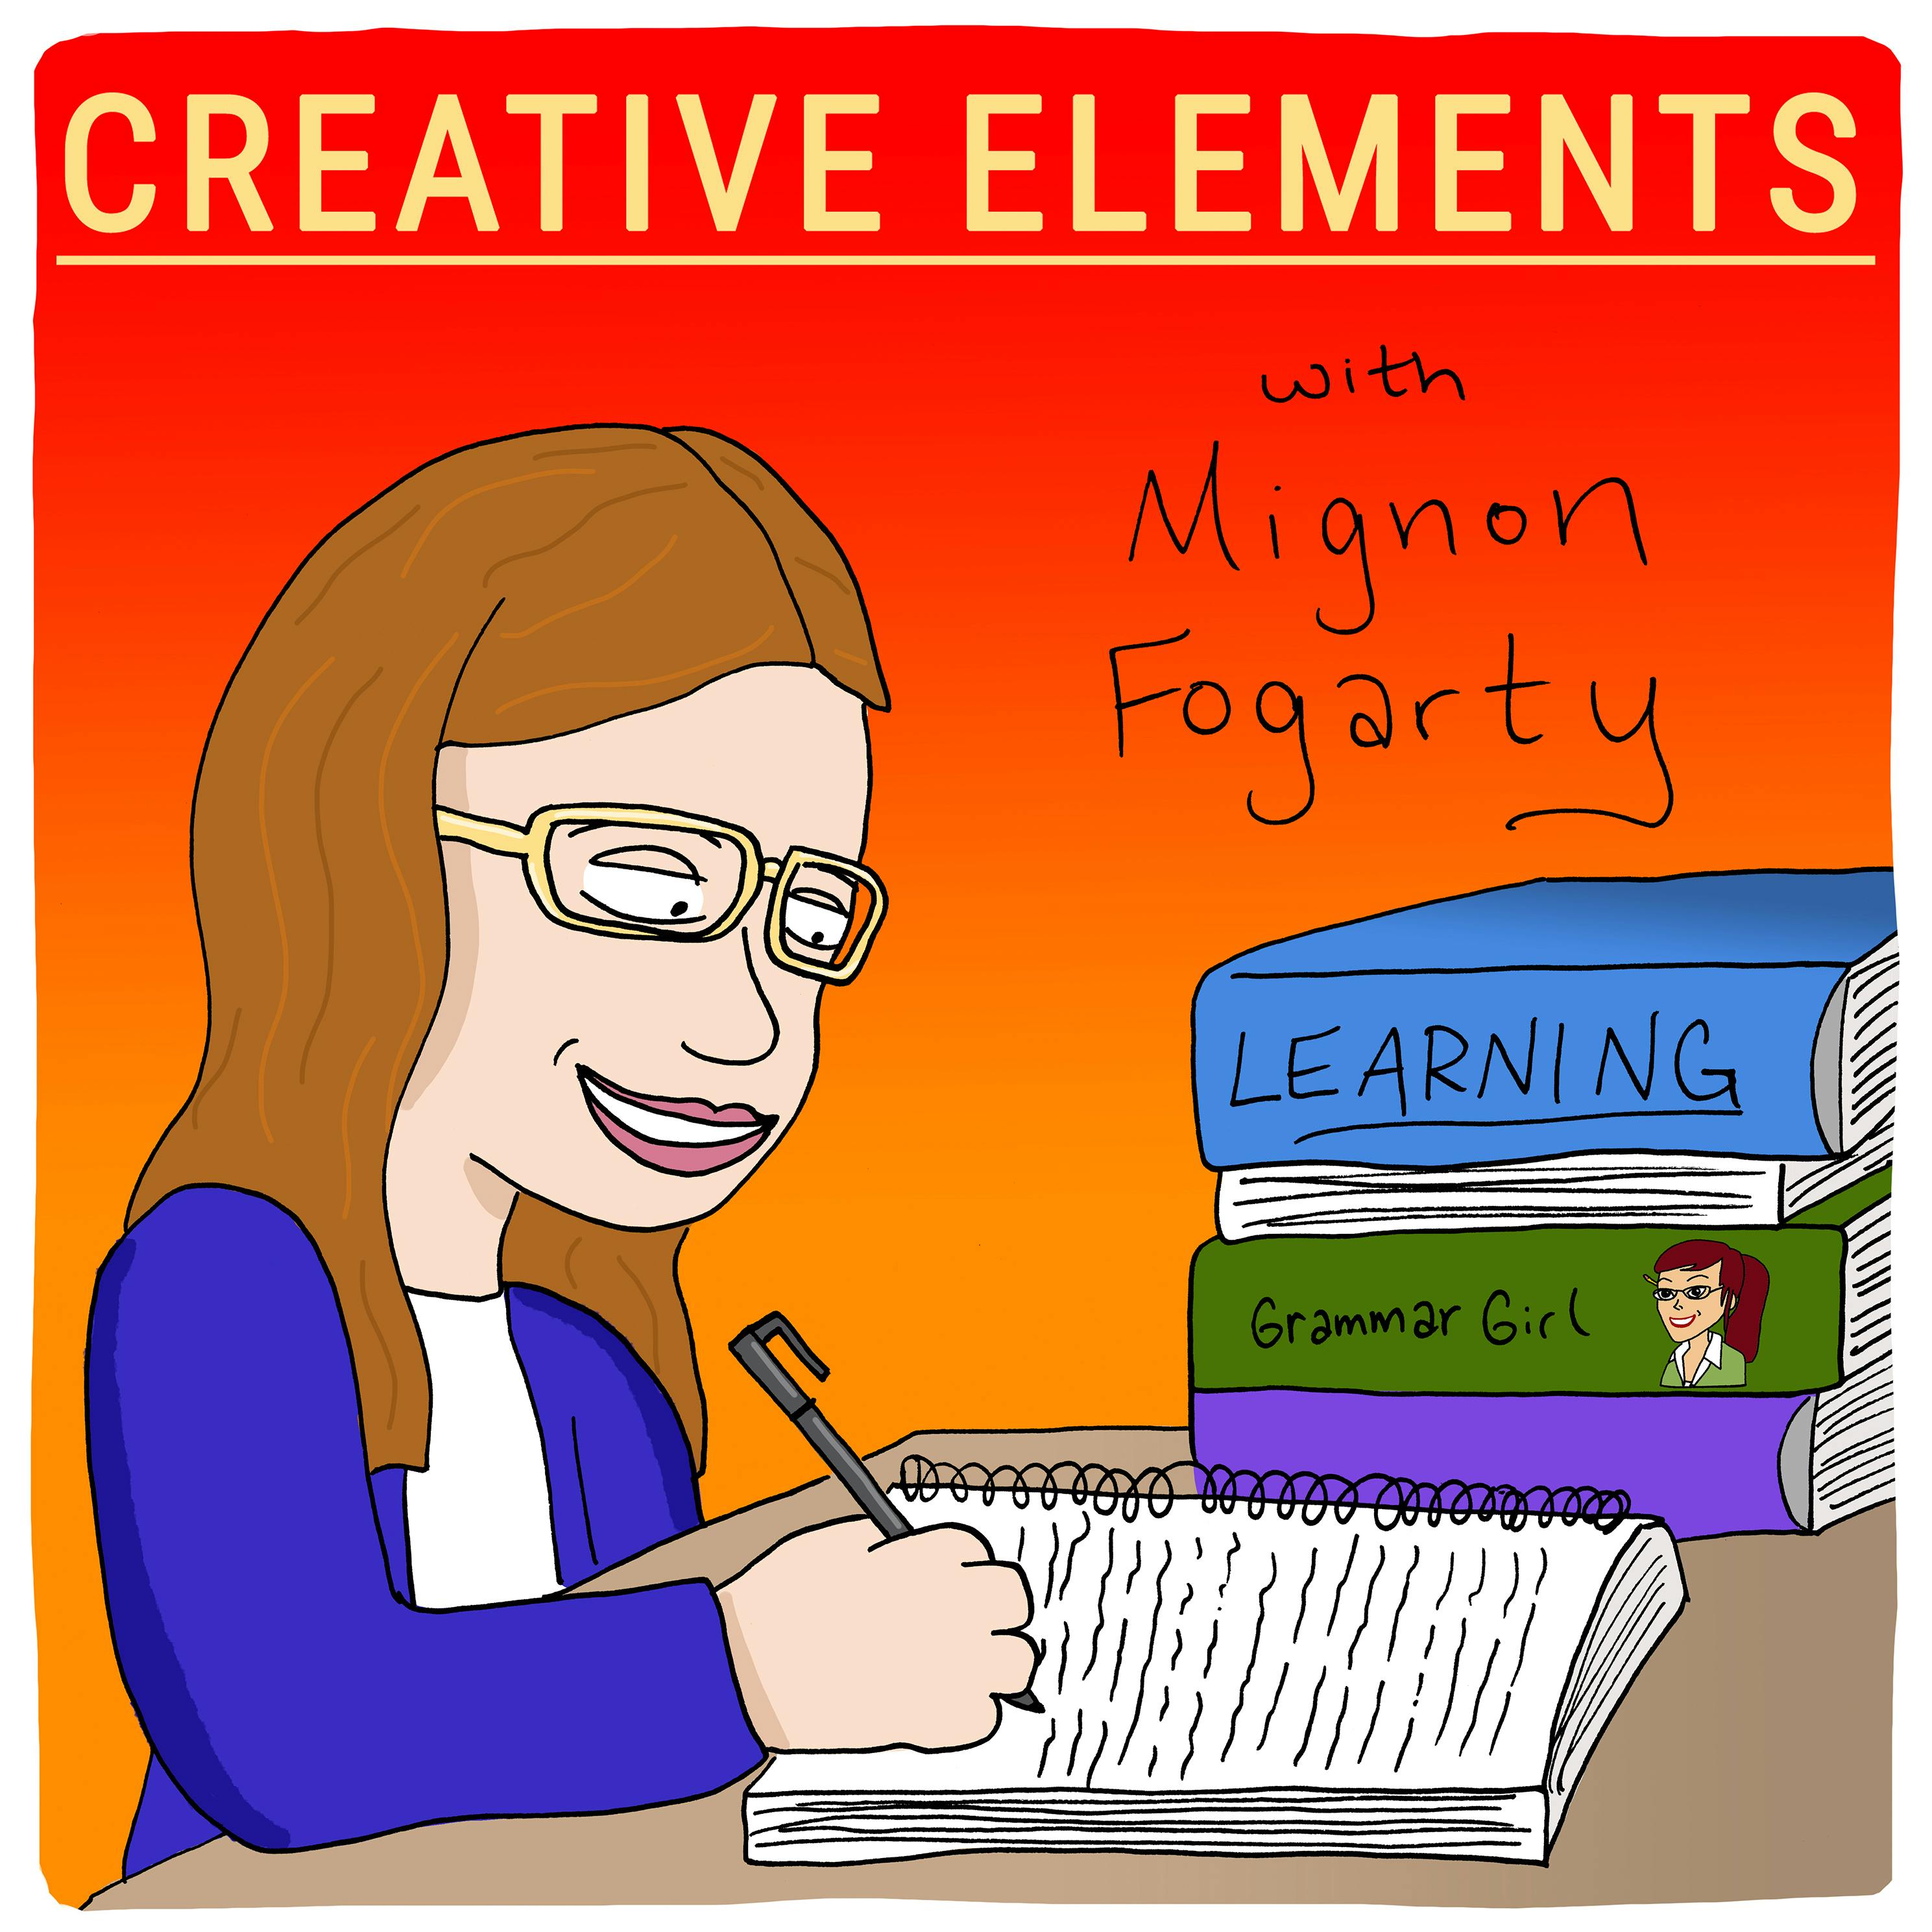 #59: Mignon Fogarty [Learning] Image